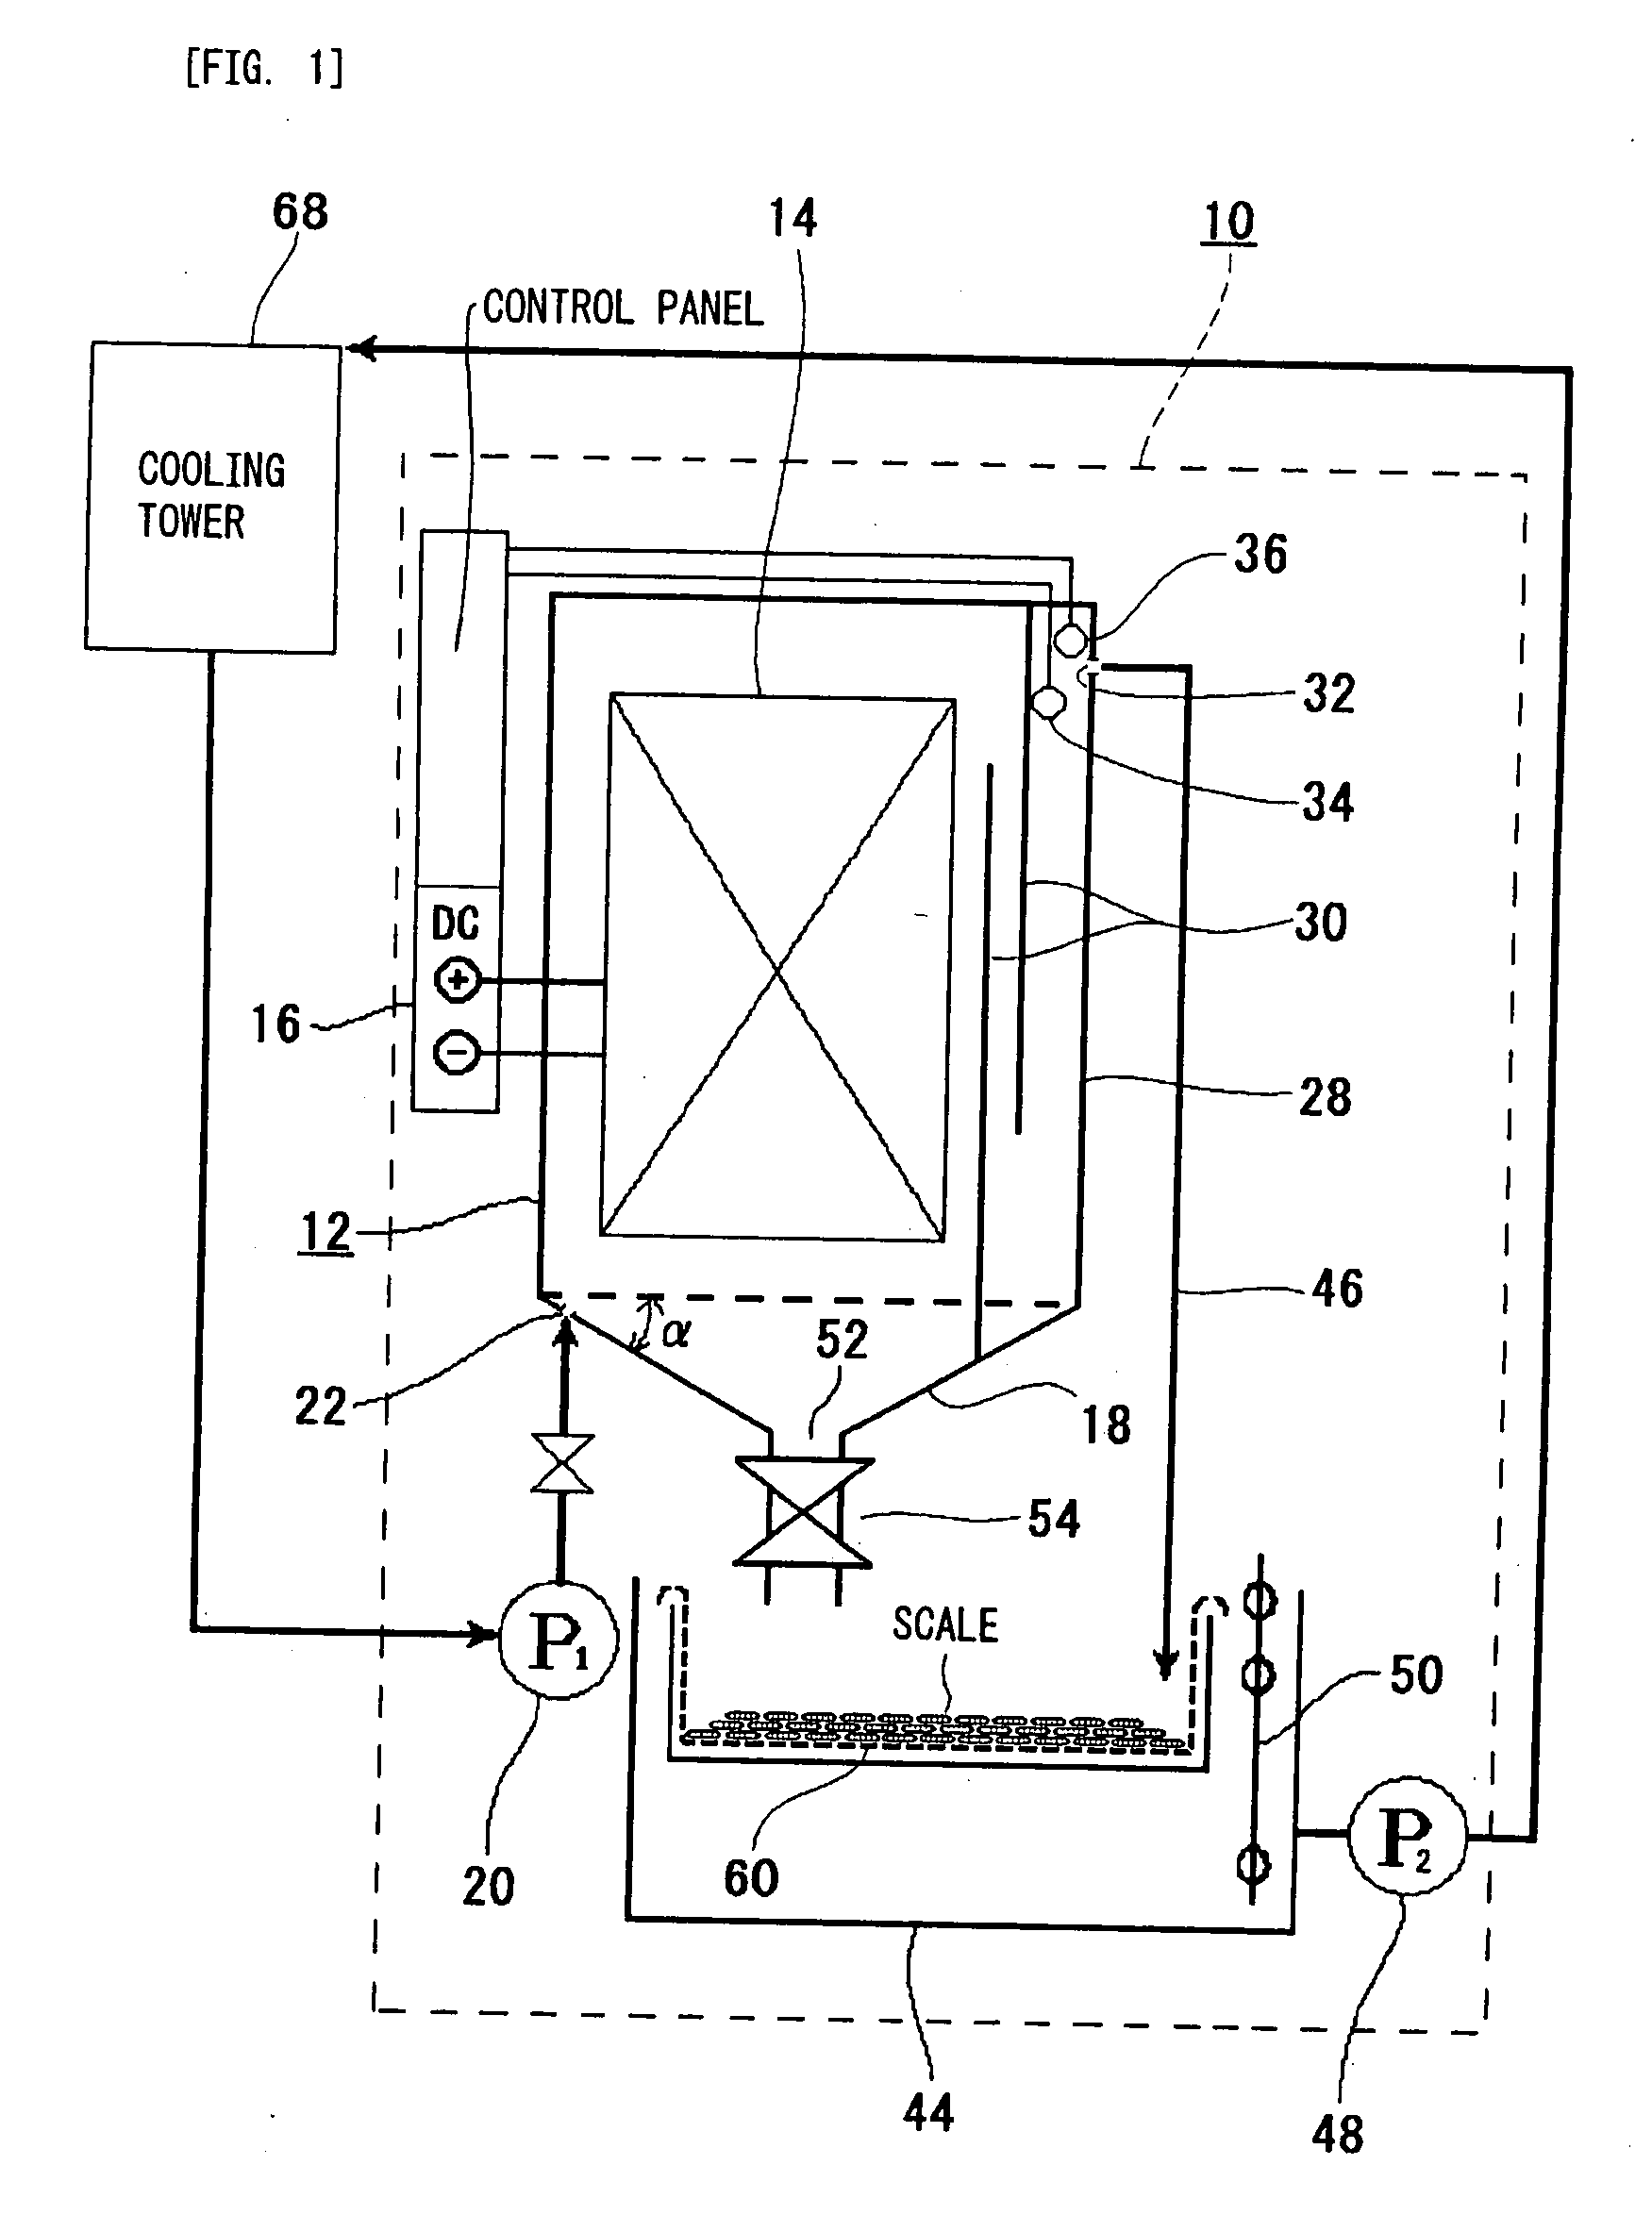 Method and Device for Cleaning Circulation Water